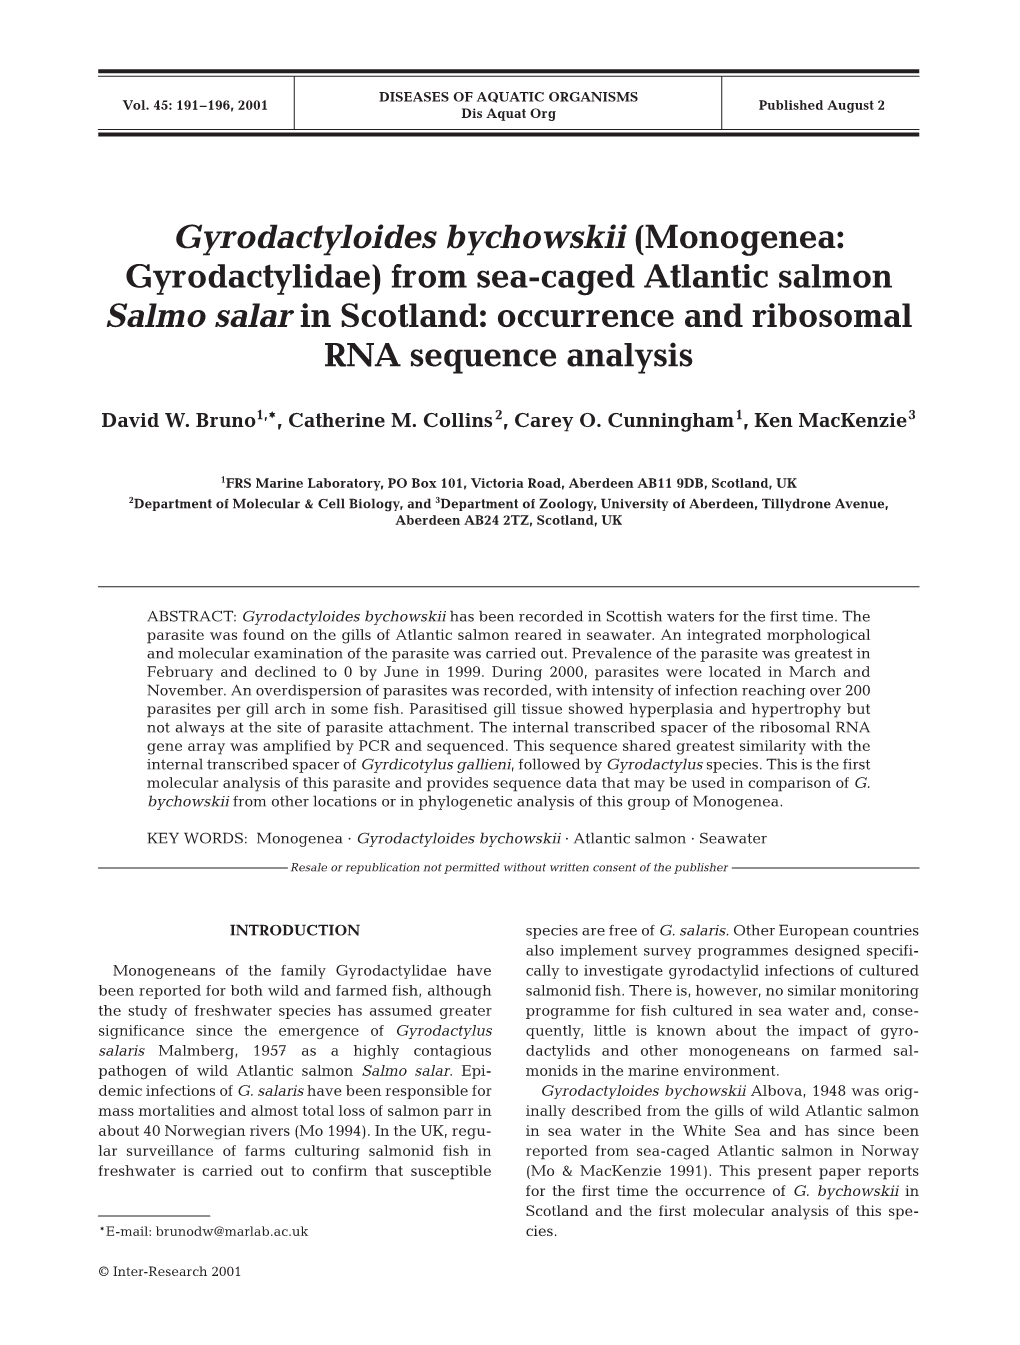 Gyrodactyloides Bychowskii (Monogenea: Gyrodactylidae) from Sea-Caged Atlantic Salmon Salmo Salar in Scotland: Occurrence and Ribosomal RNA Sequence Analysis